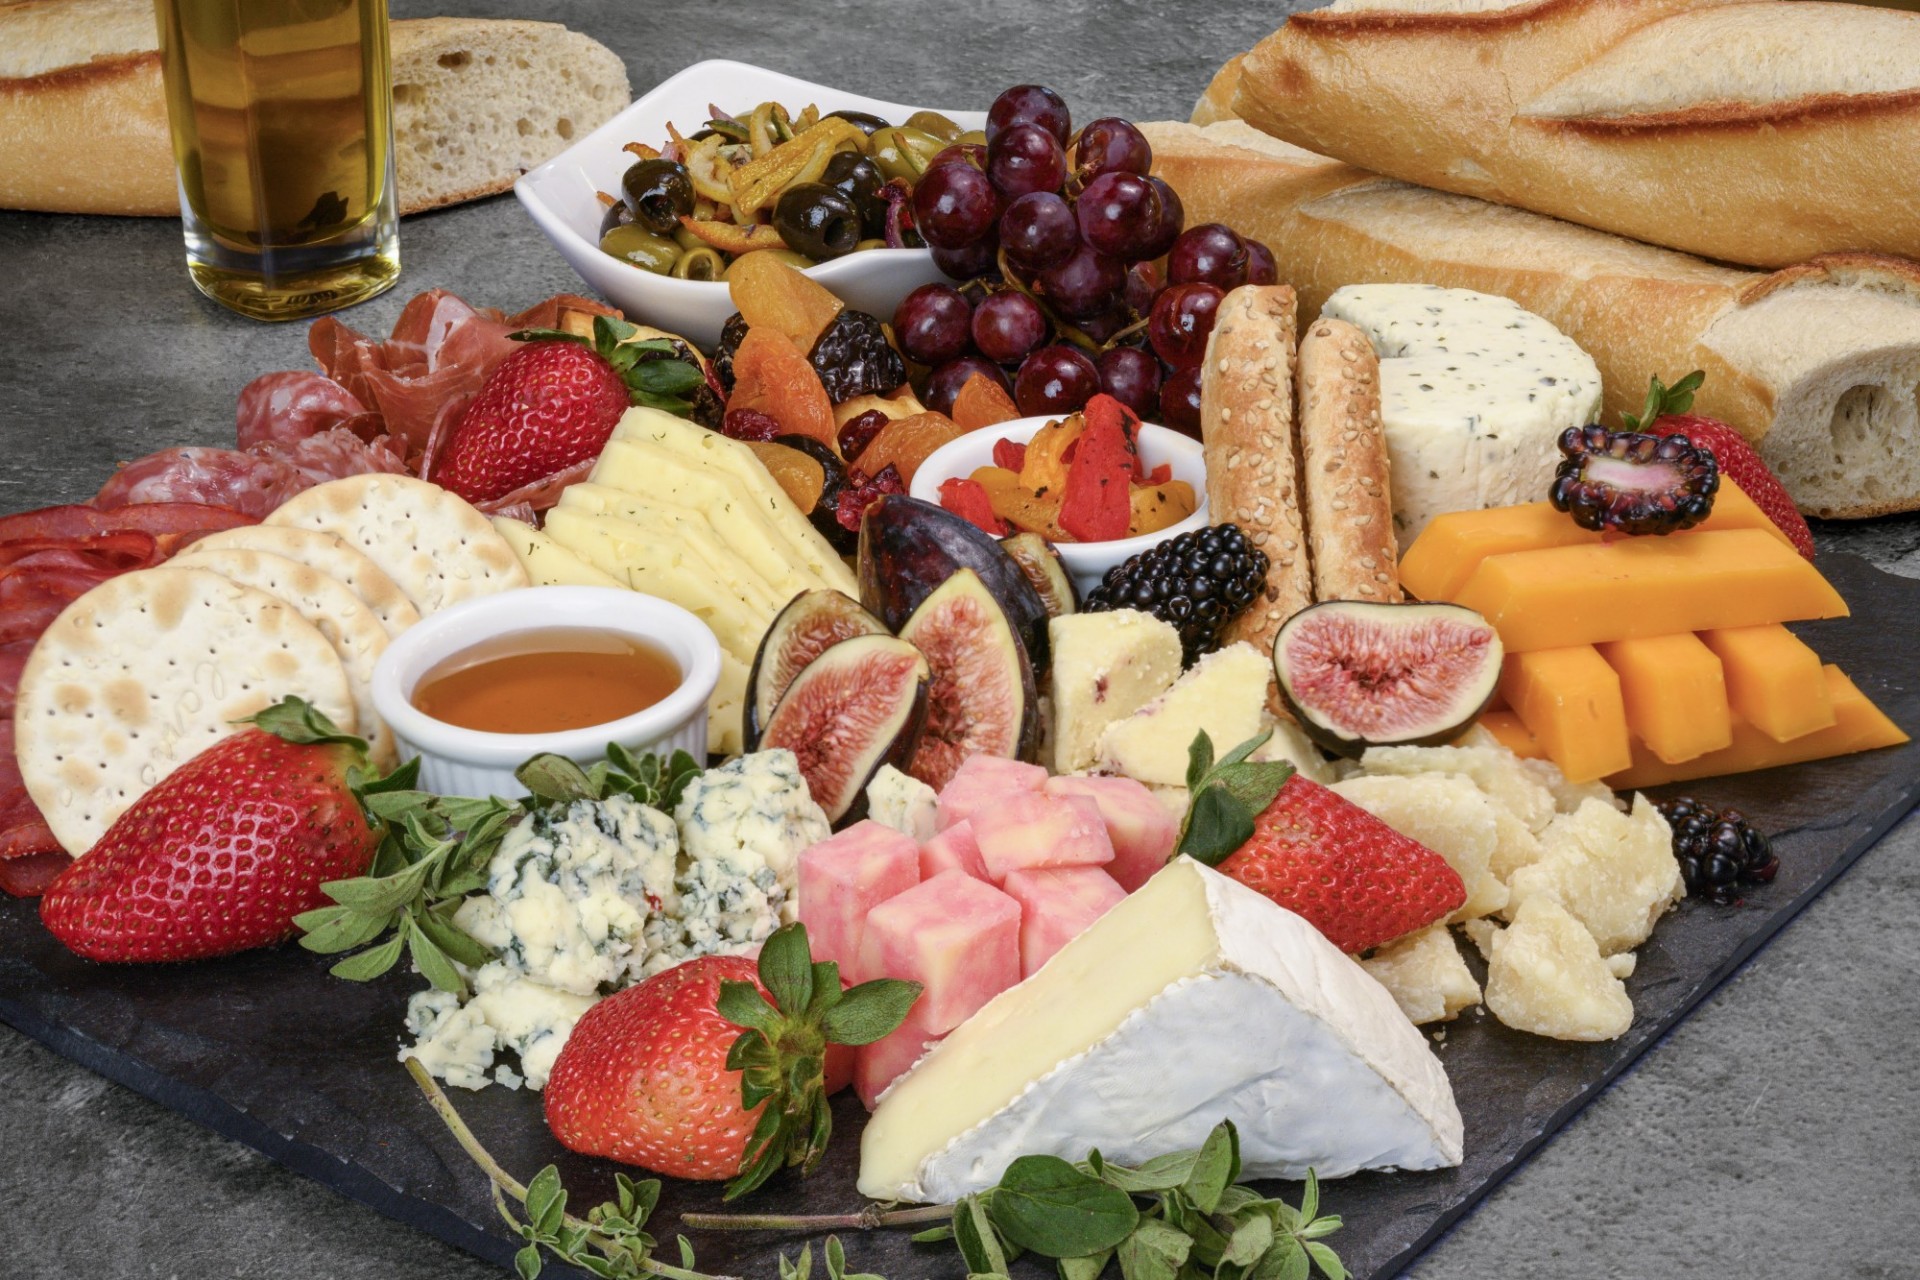 assorted crackers, fruits, cheeses, cured meats and other cold items are served on a slate board.